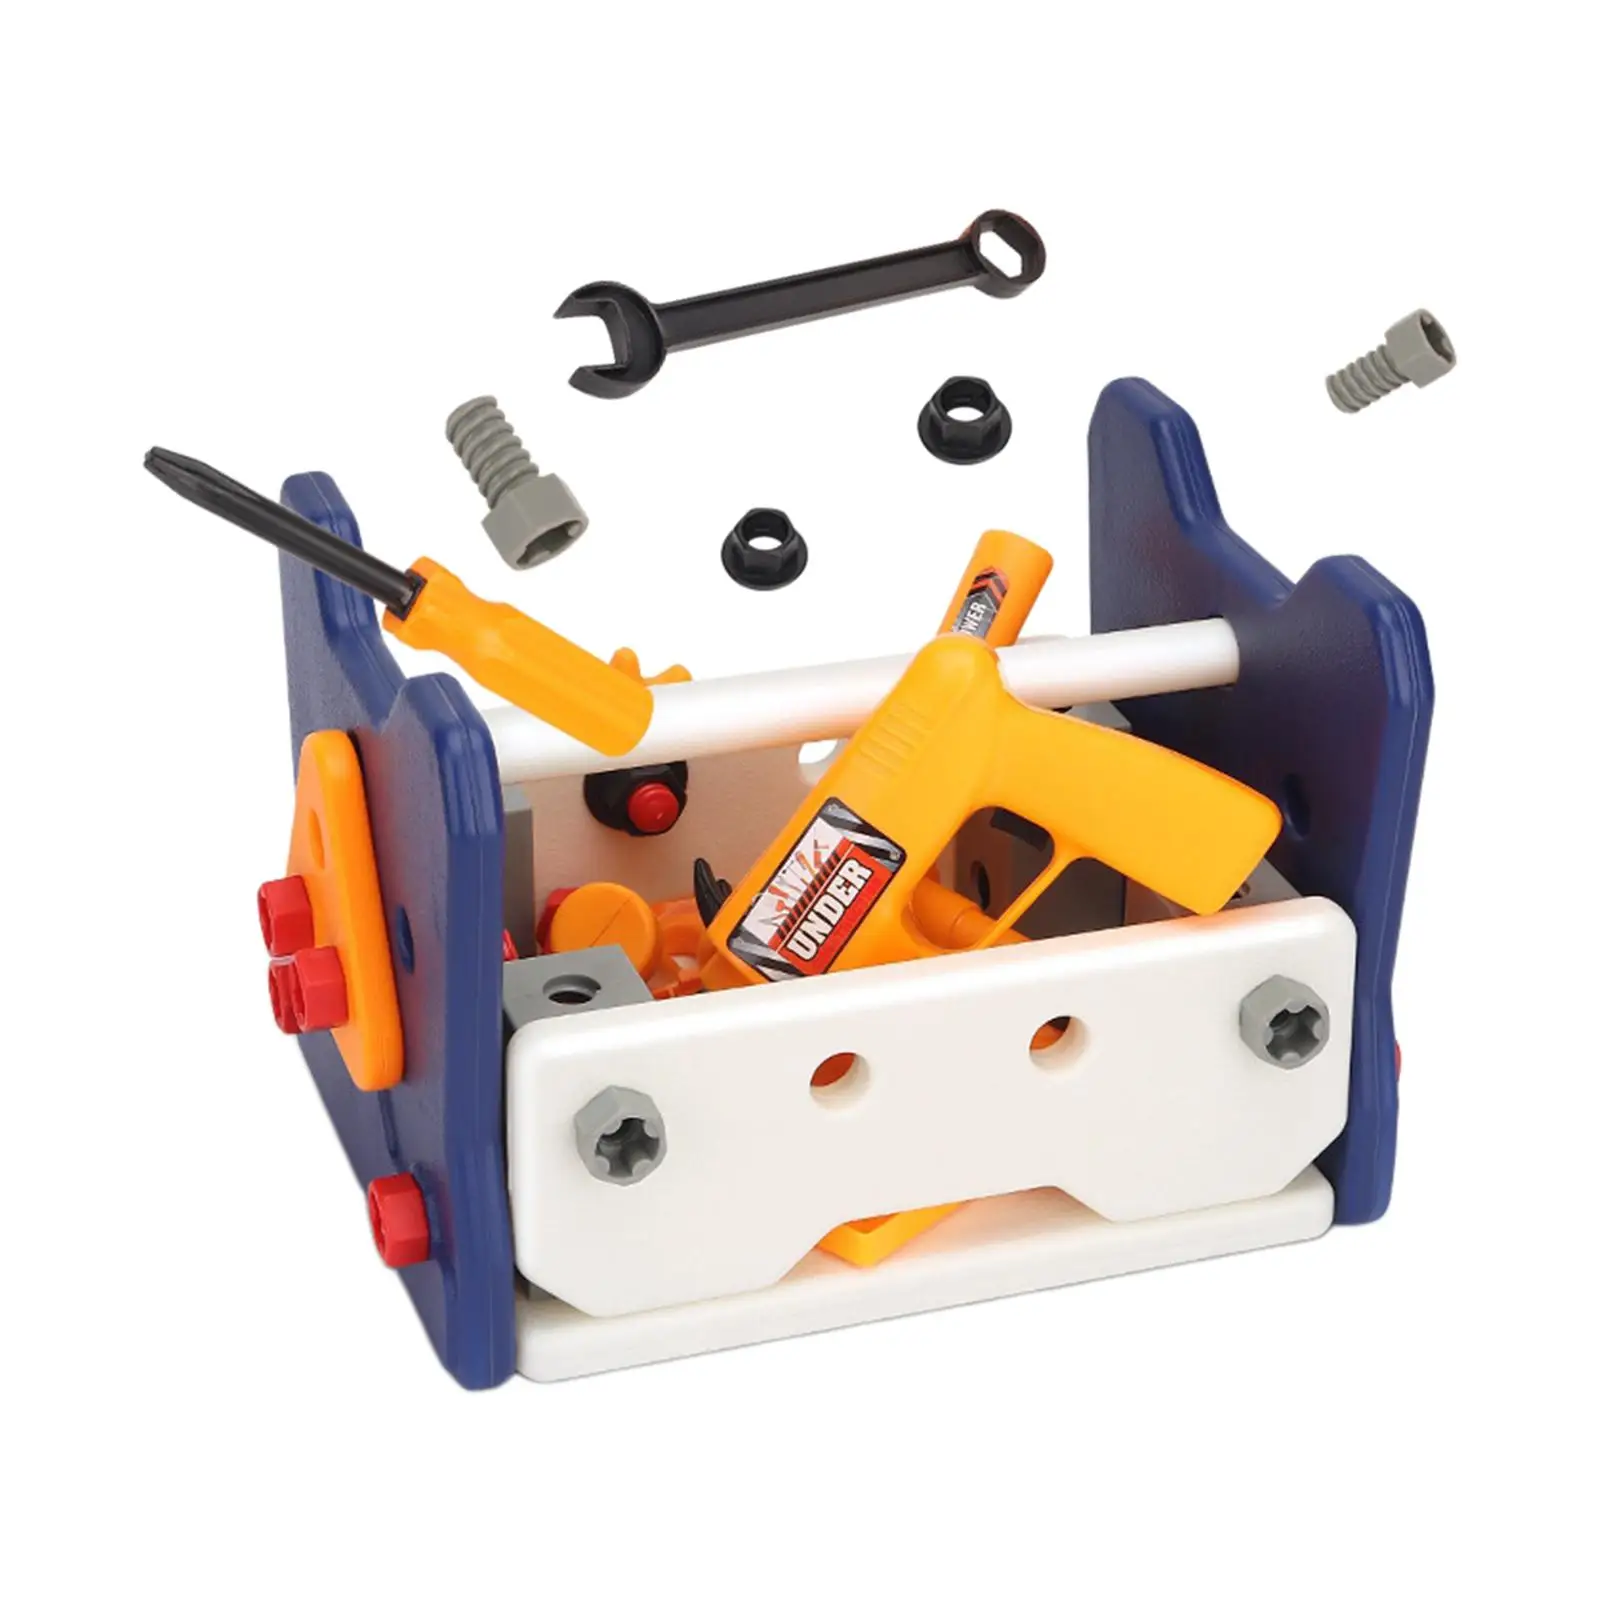 Toolbox Pretend Play Set Screw Disassembly Toy Montessori for Holiday Gifts